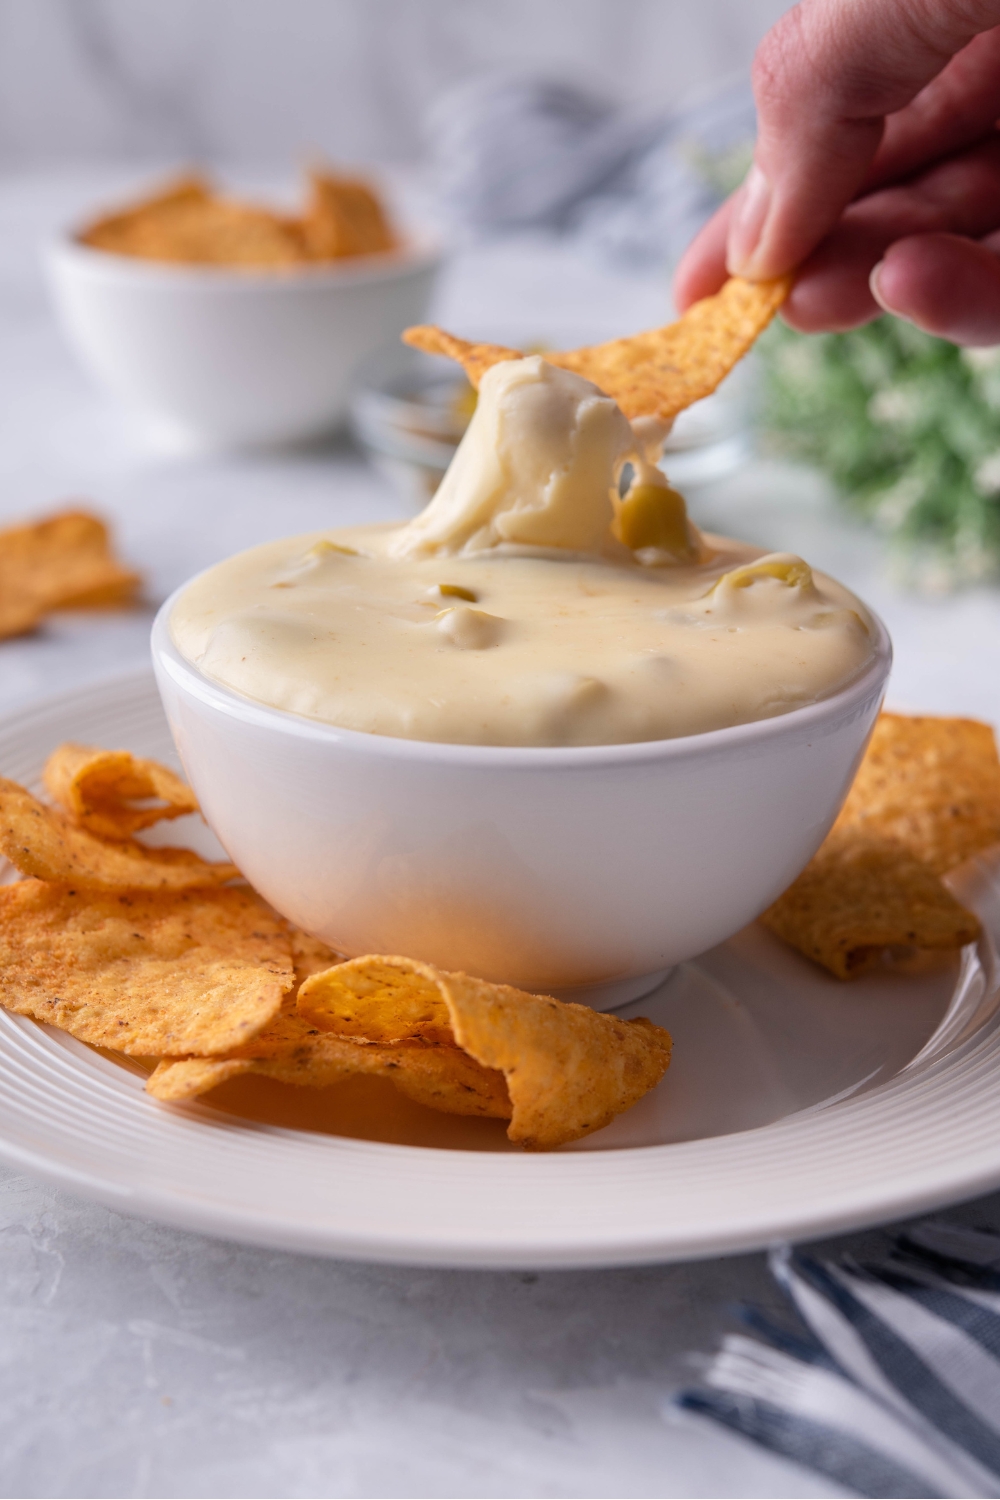 A small bowl with queso on a plate with tortilla chips. A hand is dipping a tortilla chip into the queso.